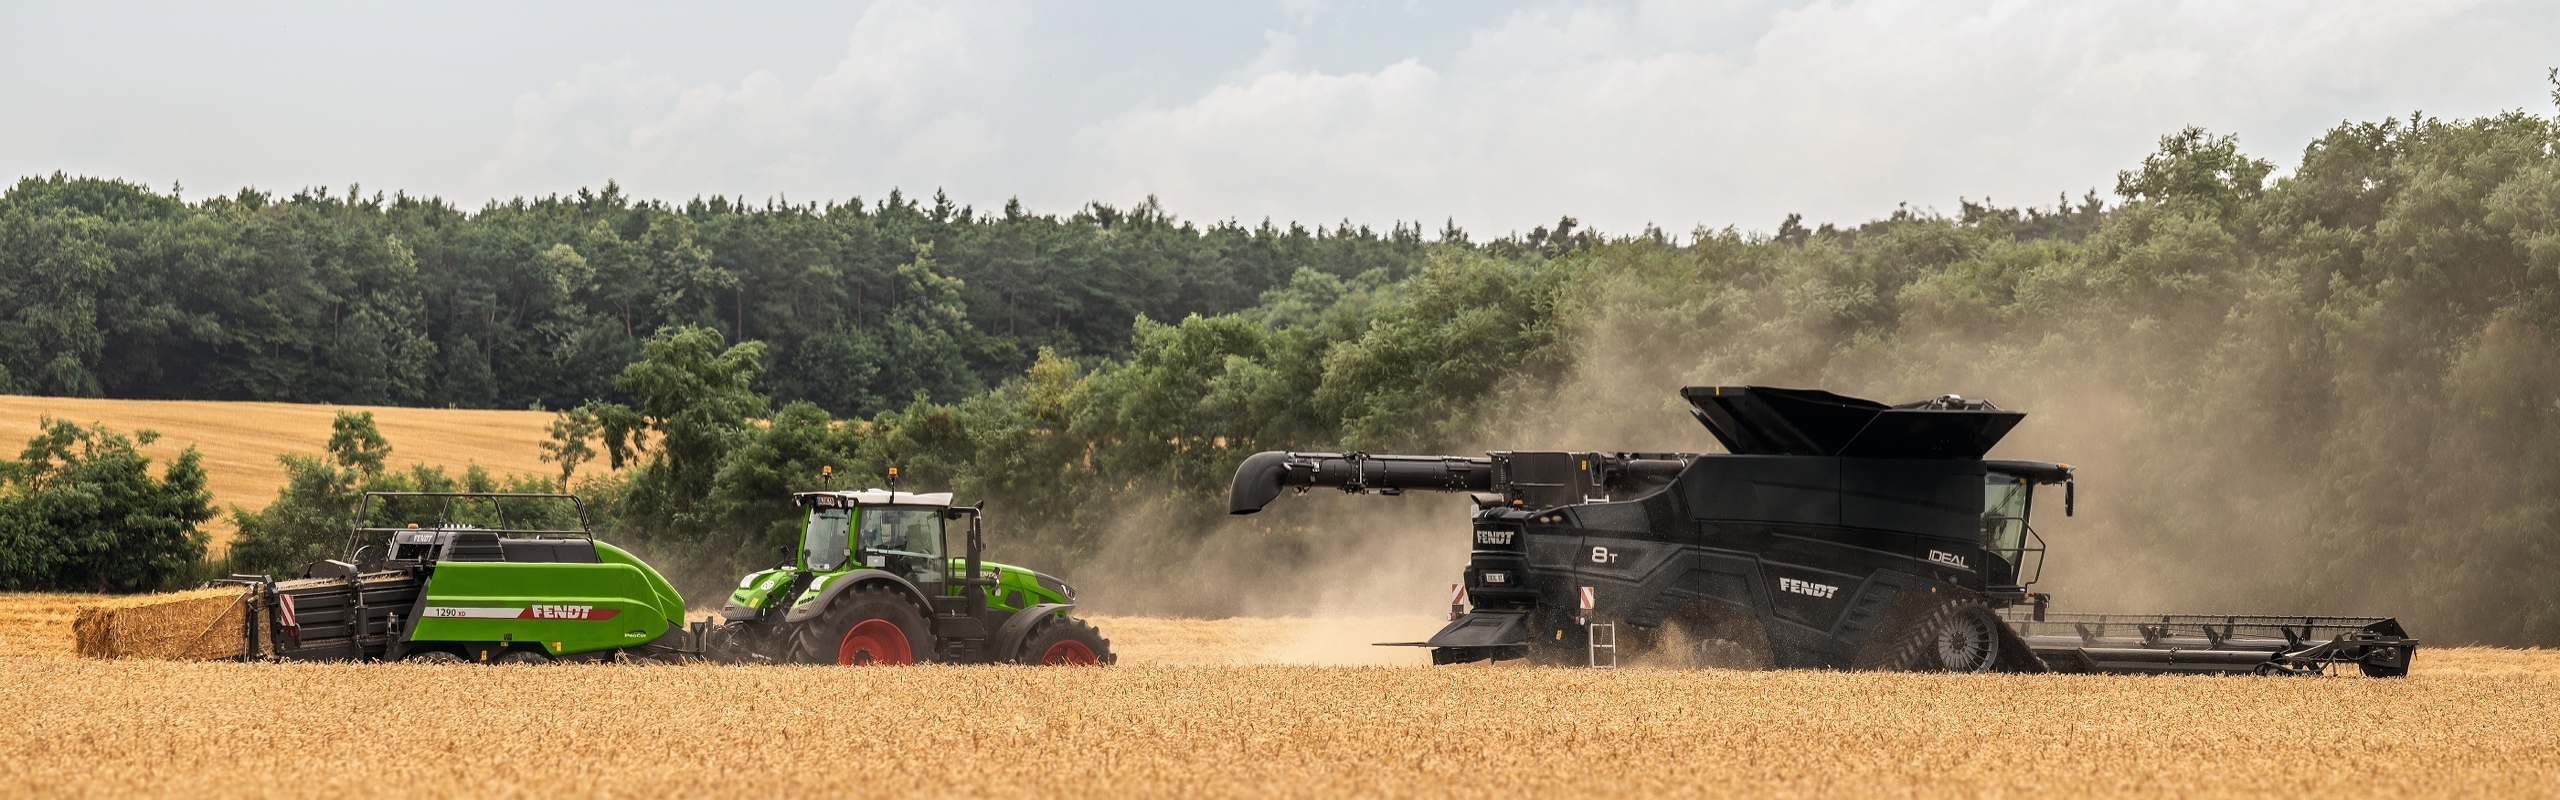 Fendt IDEAL 10 T in the field harvesting